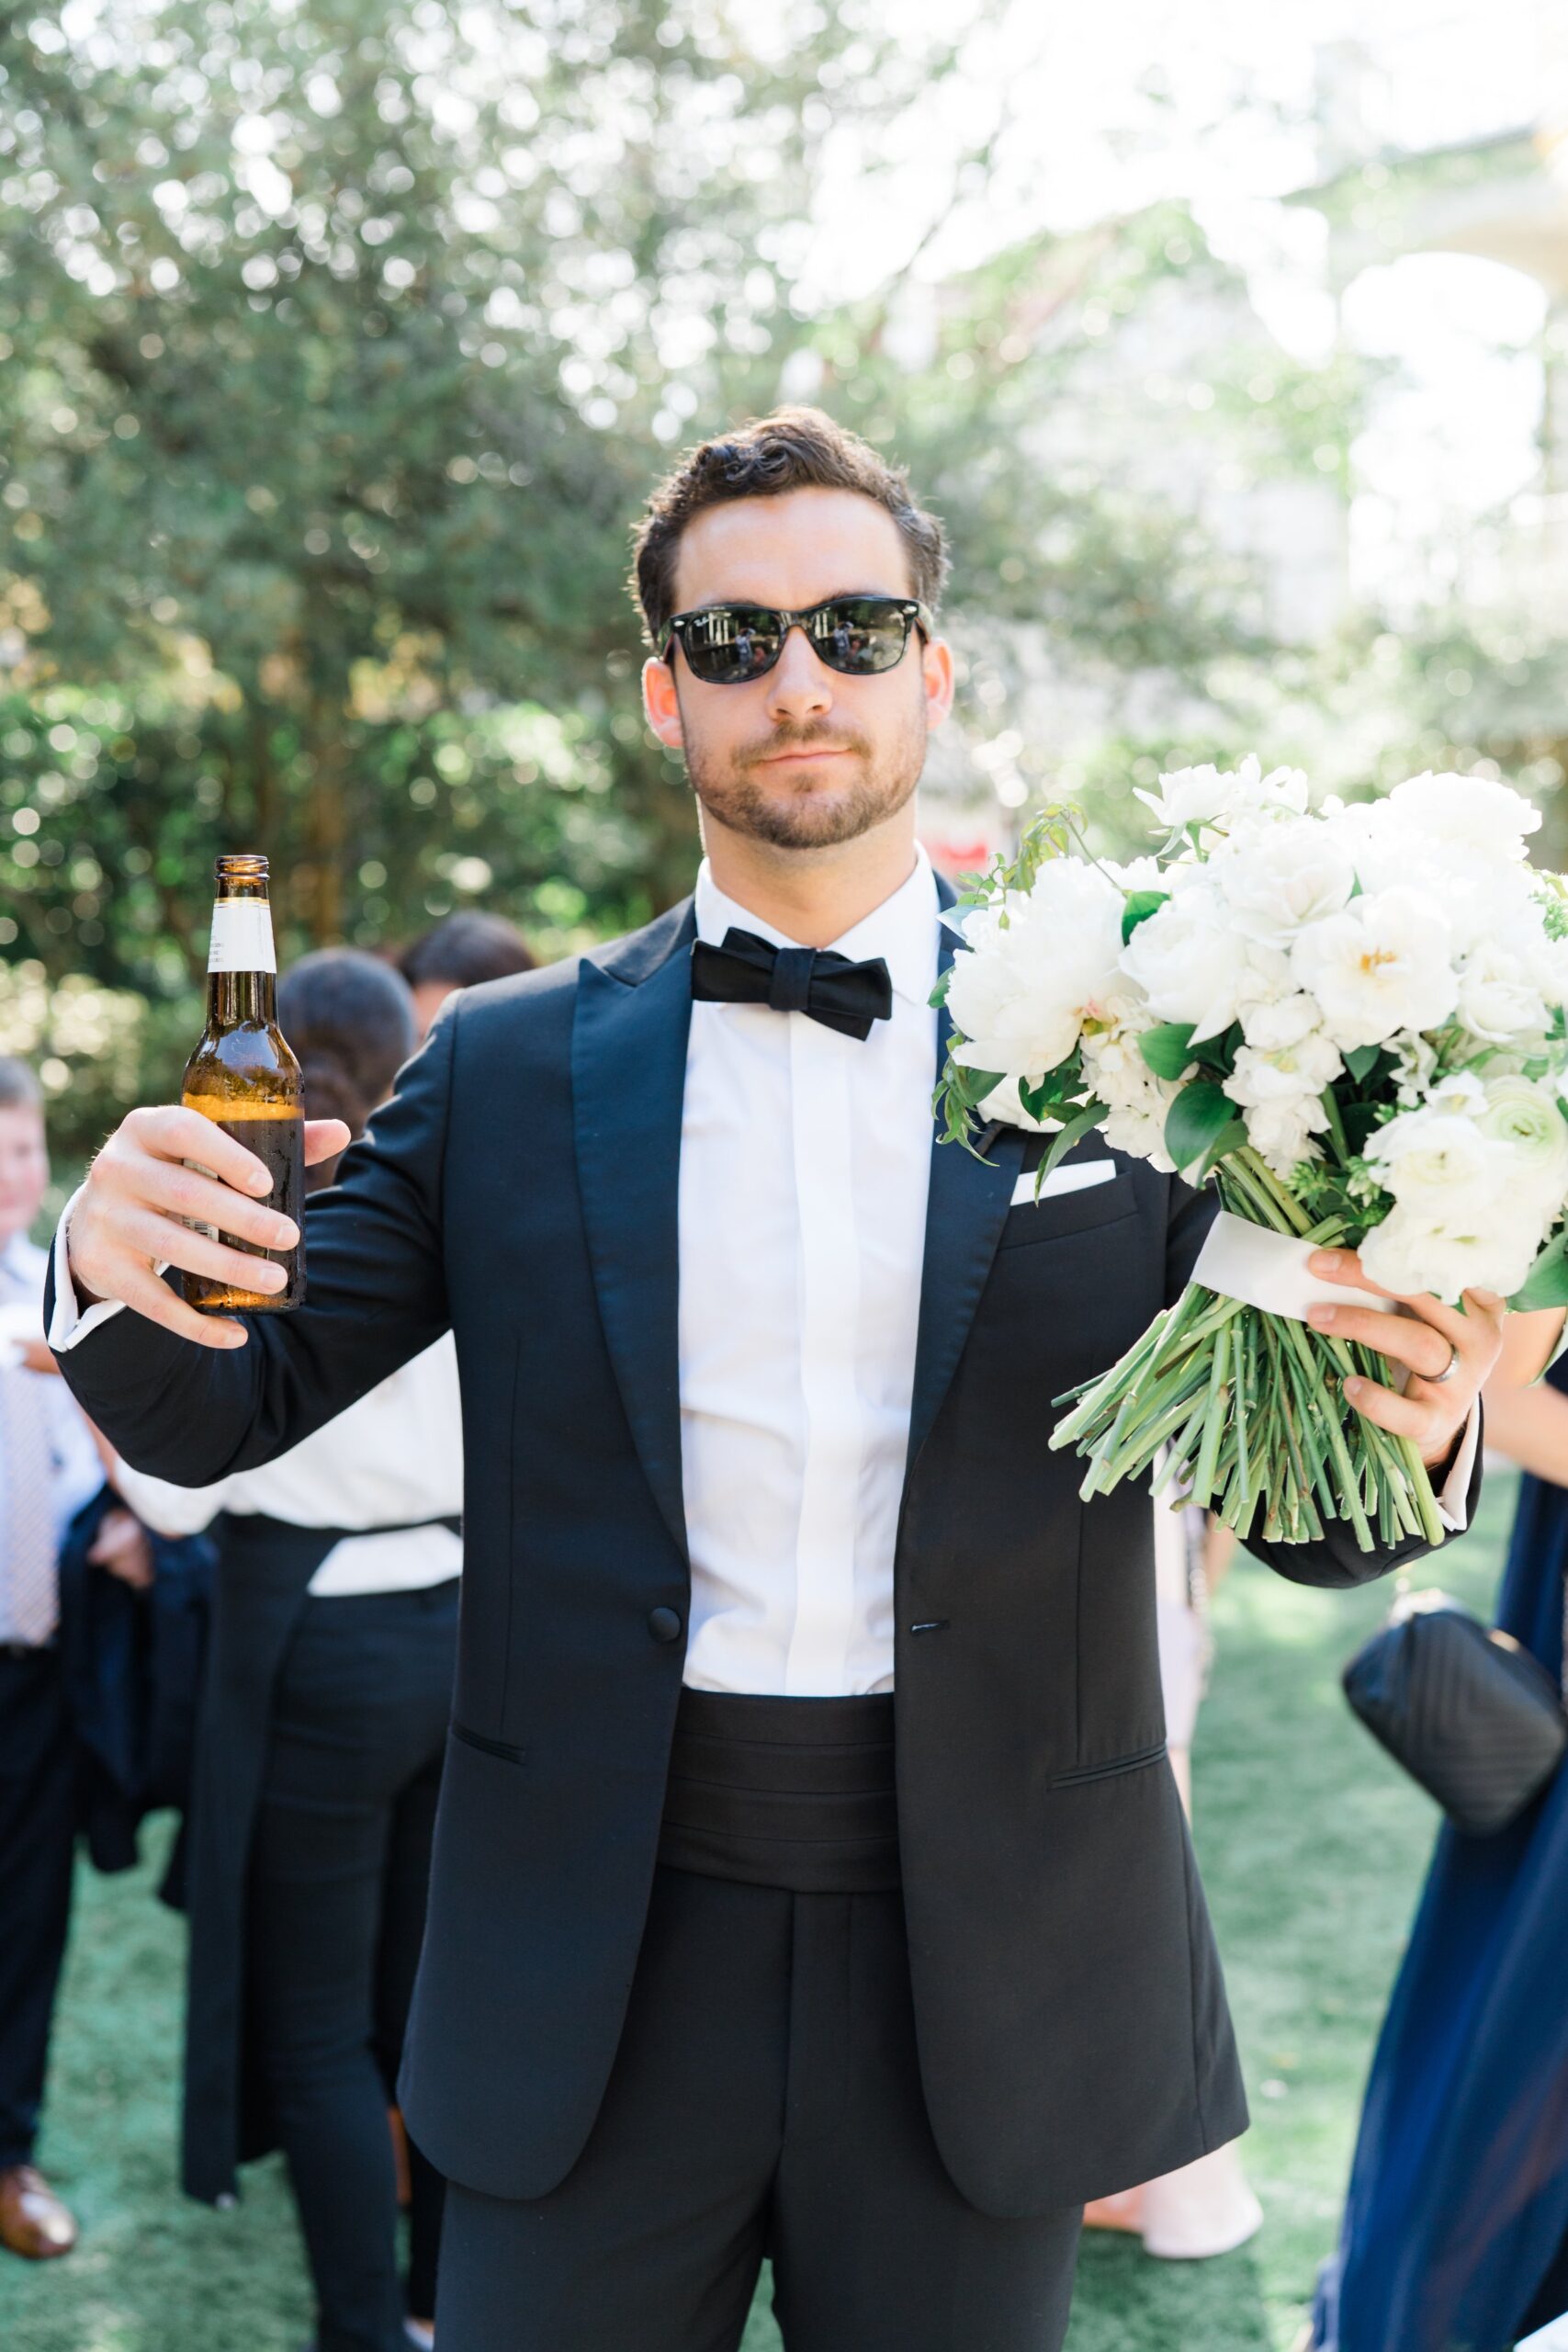 Tuxedo groom holding beer and bridal flowers.